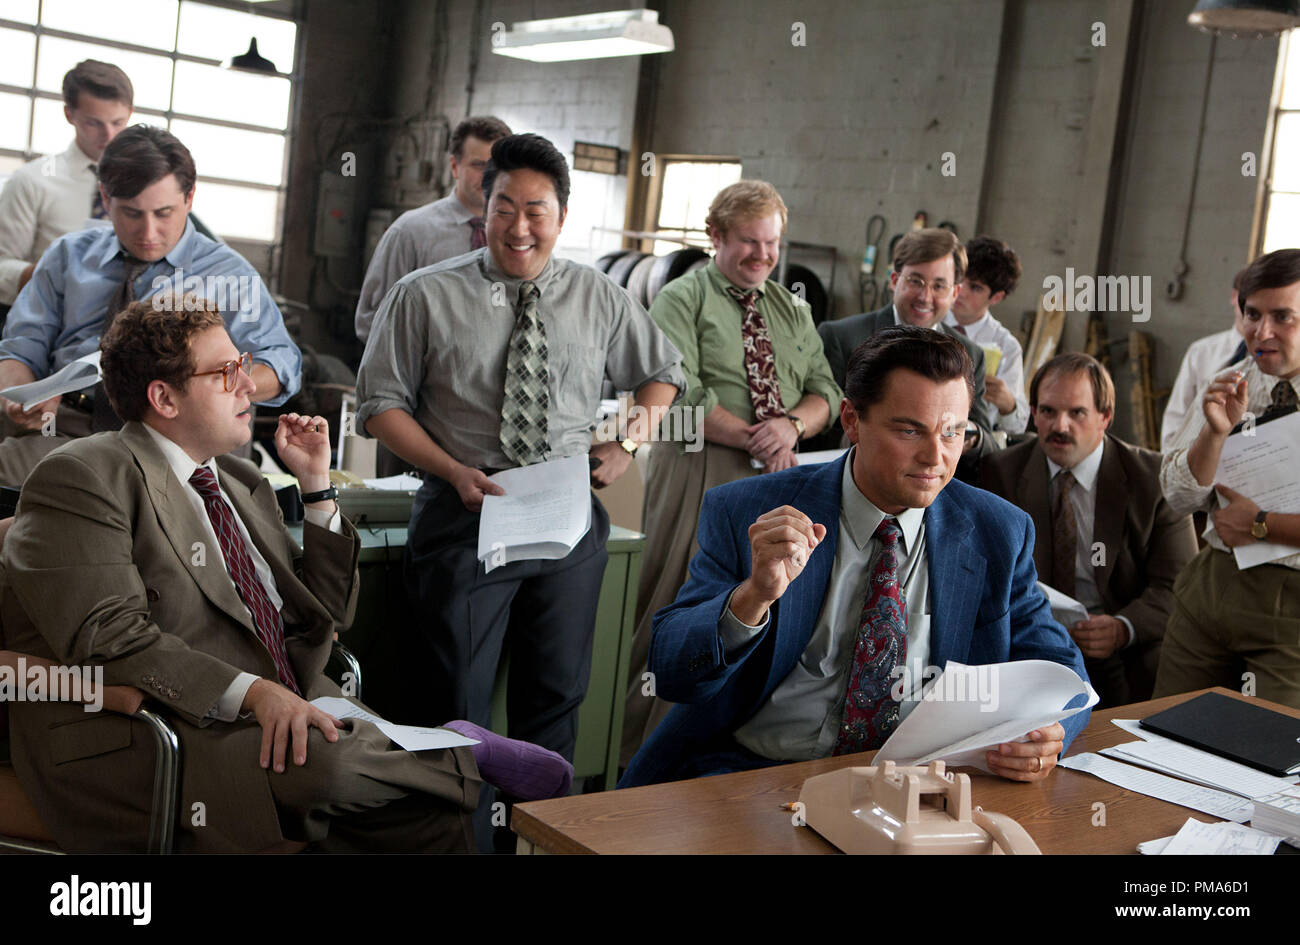 Foreground left to right: Jonah Hill is Azoff, Kenneth Choi is Chester Ming, Leonardo DiCaprio Jordan Belfort, Henry Zebrowski is Alden Kupferberg ("Sea P.J. Bryne is Nicky ("Rugrat"),